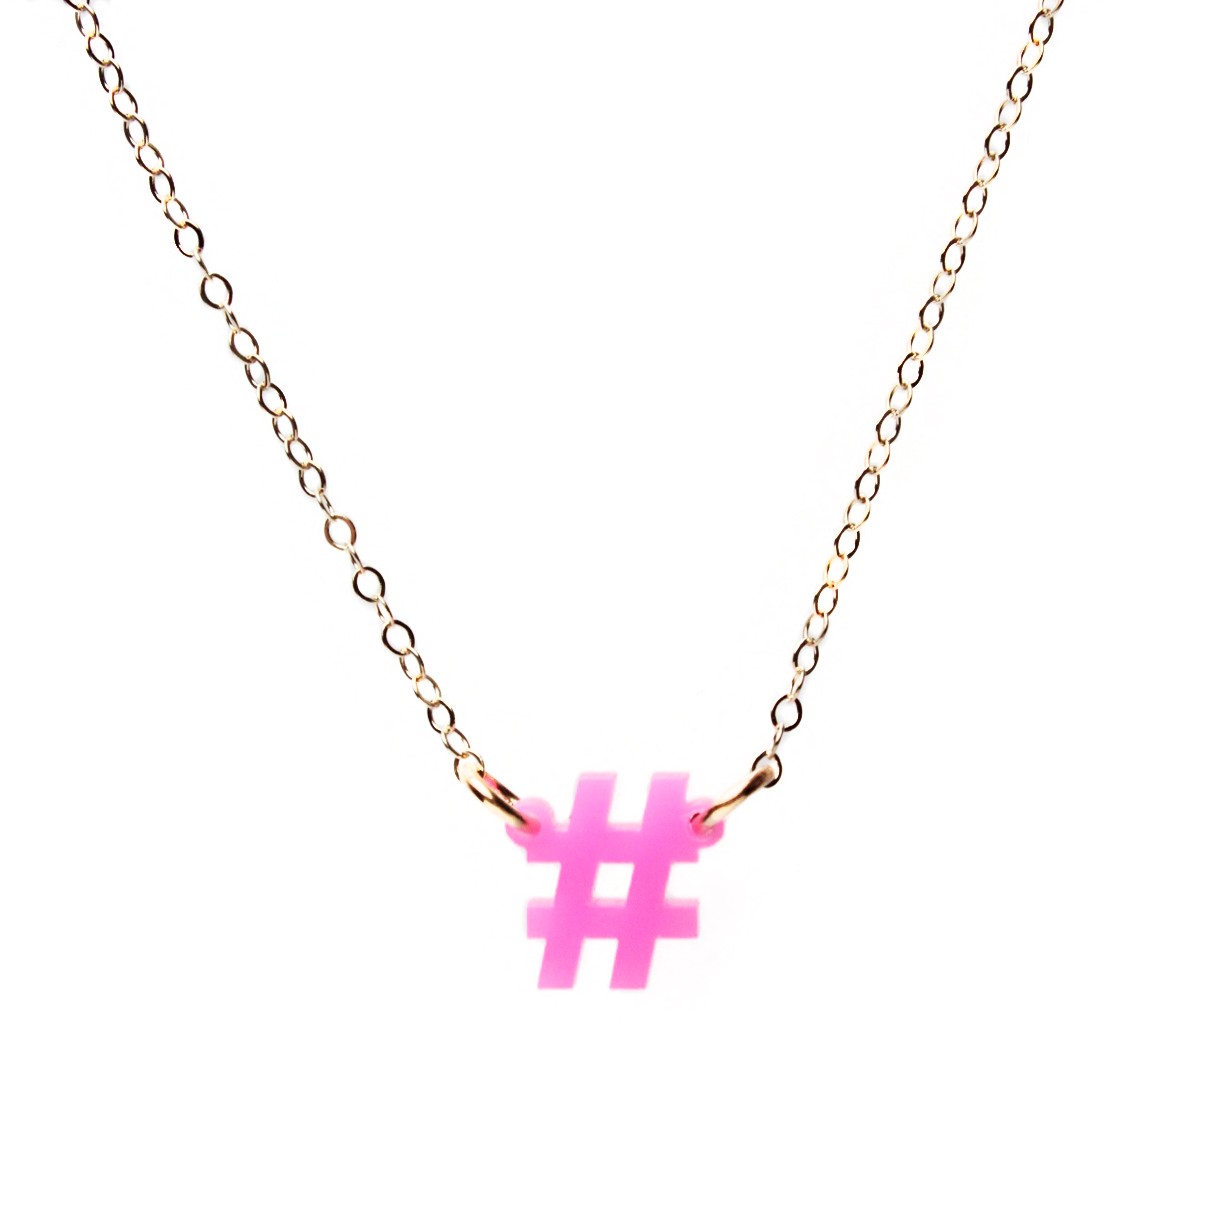 The mini hashtag necklace: Wear your love of social media around your neck